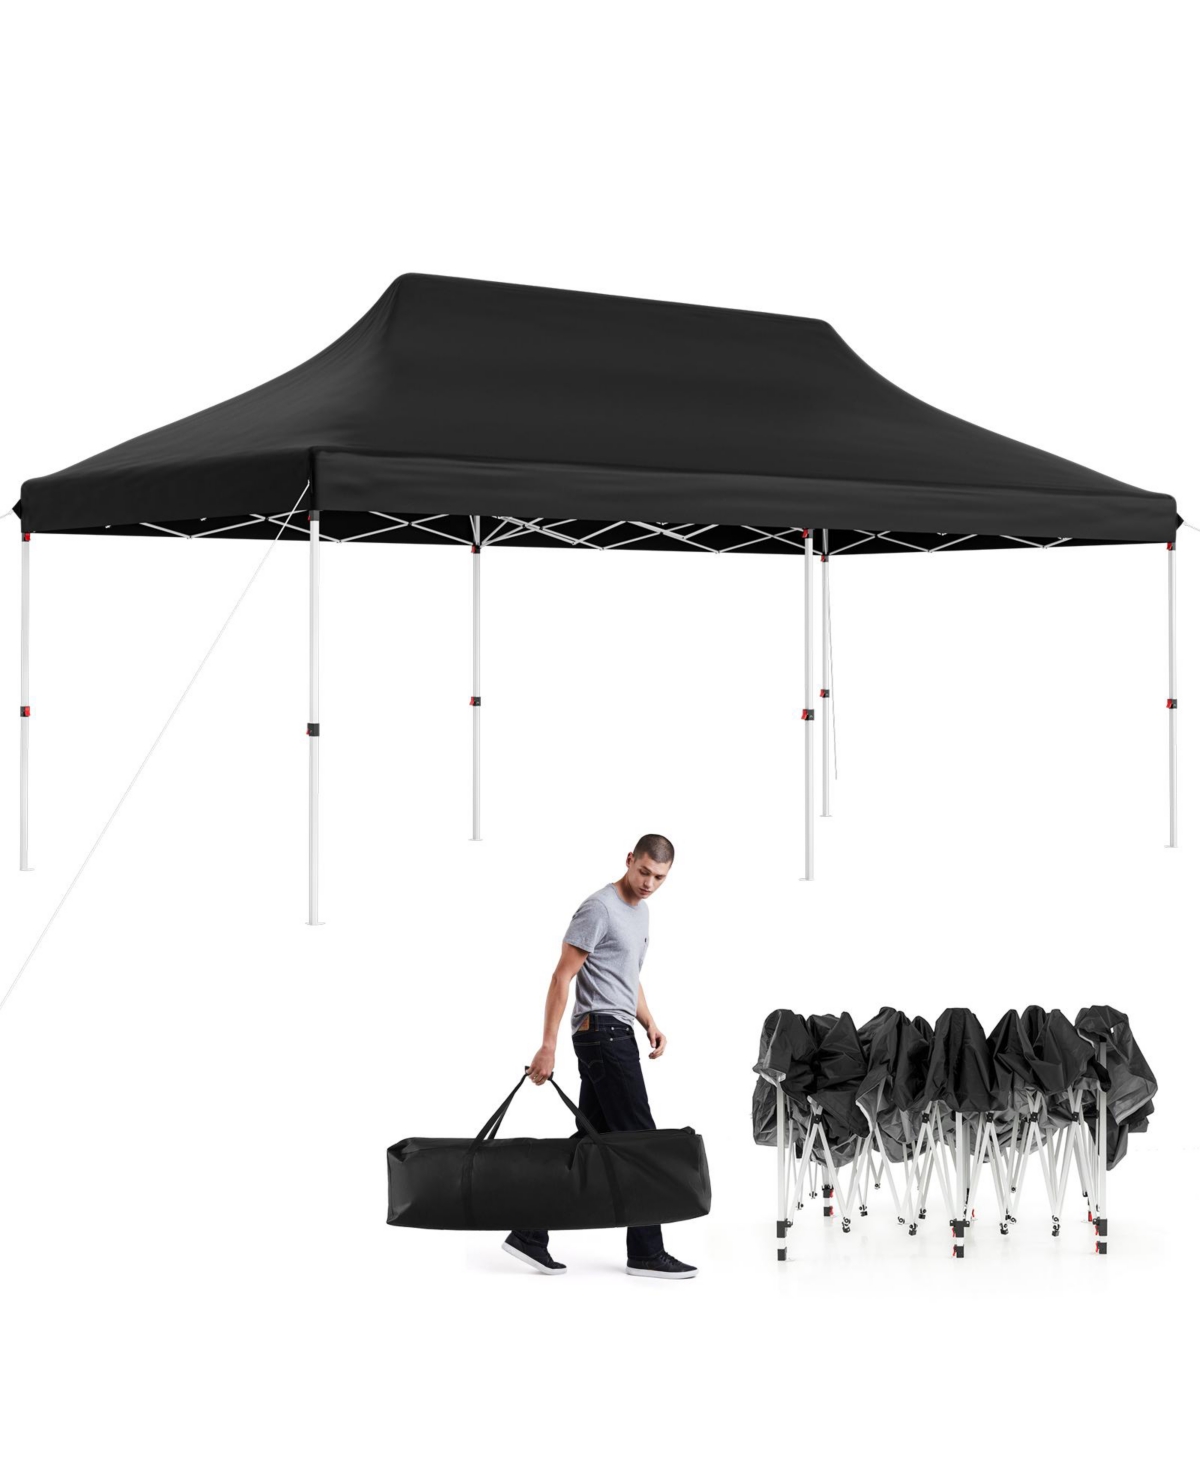 10 x 20 Ft Pop-up Canopy UPF50+ Sun Protection Tent with Carrying Bag - White